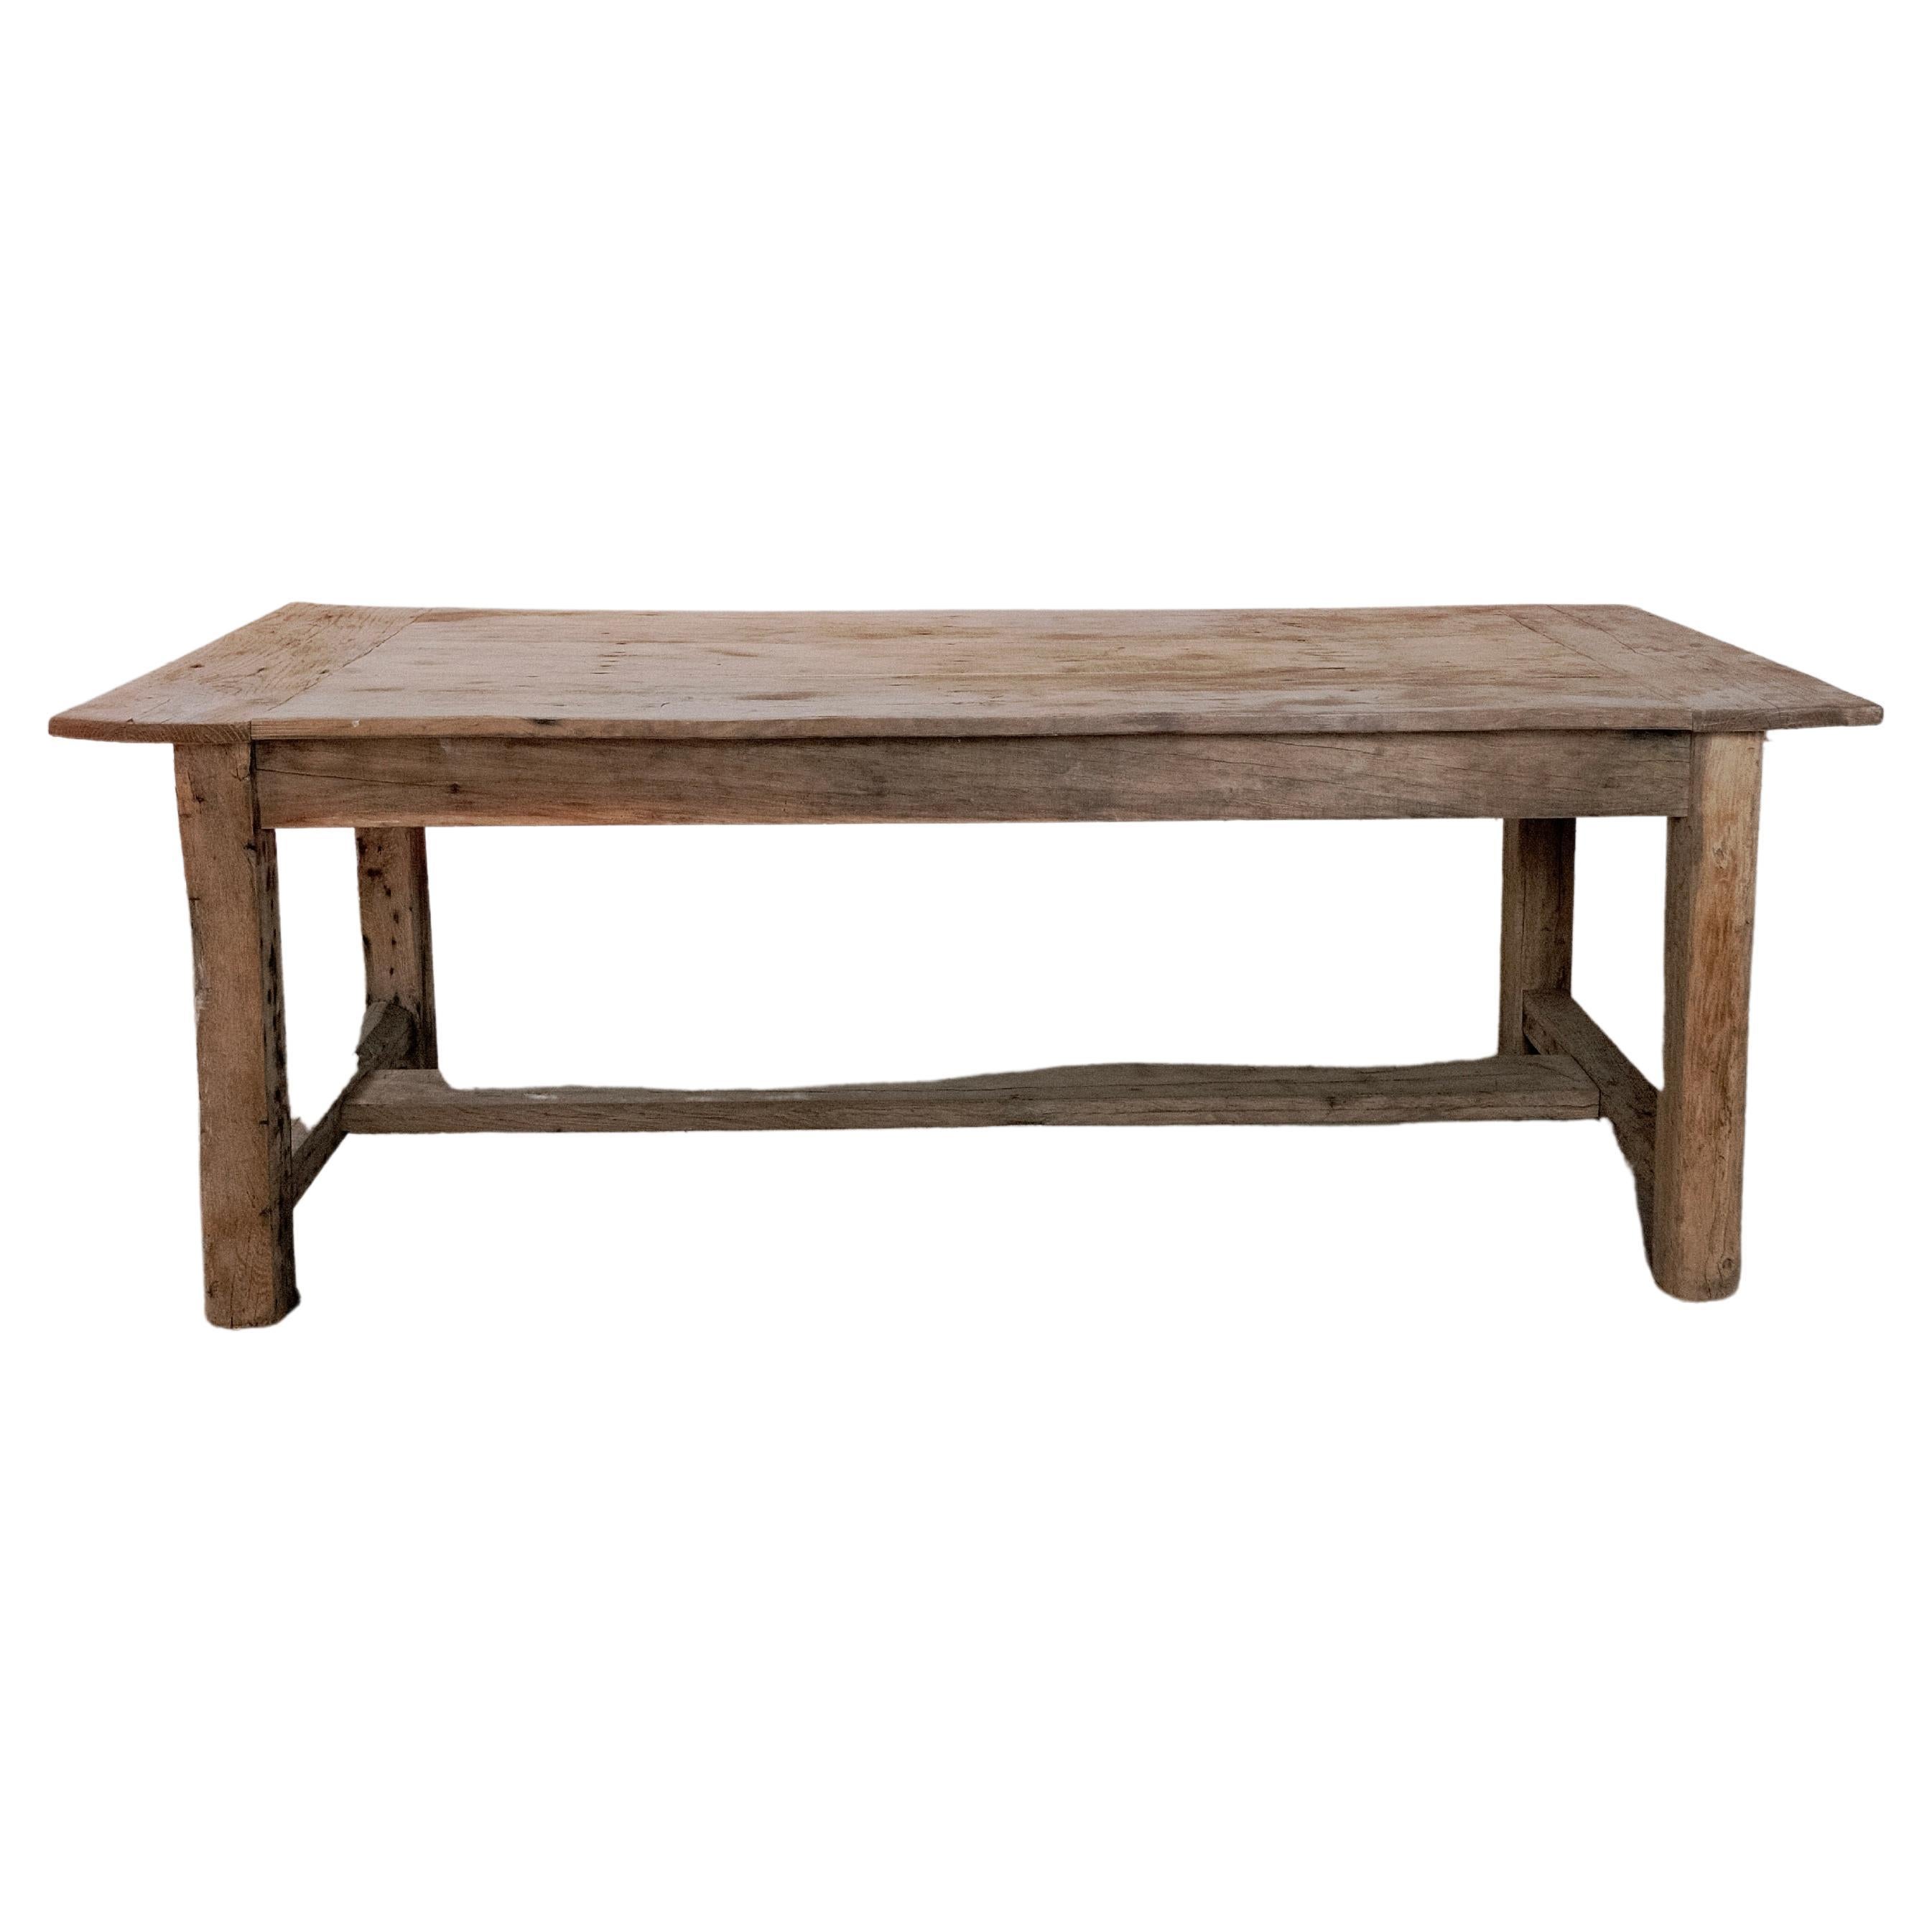 19th Century French Farm House Table with H Stretcher For Sale